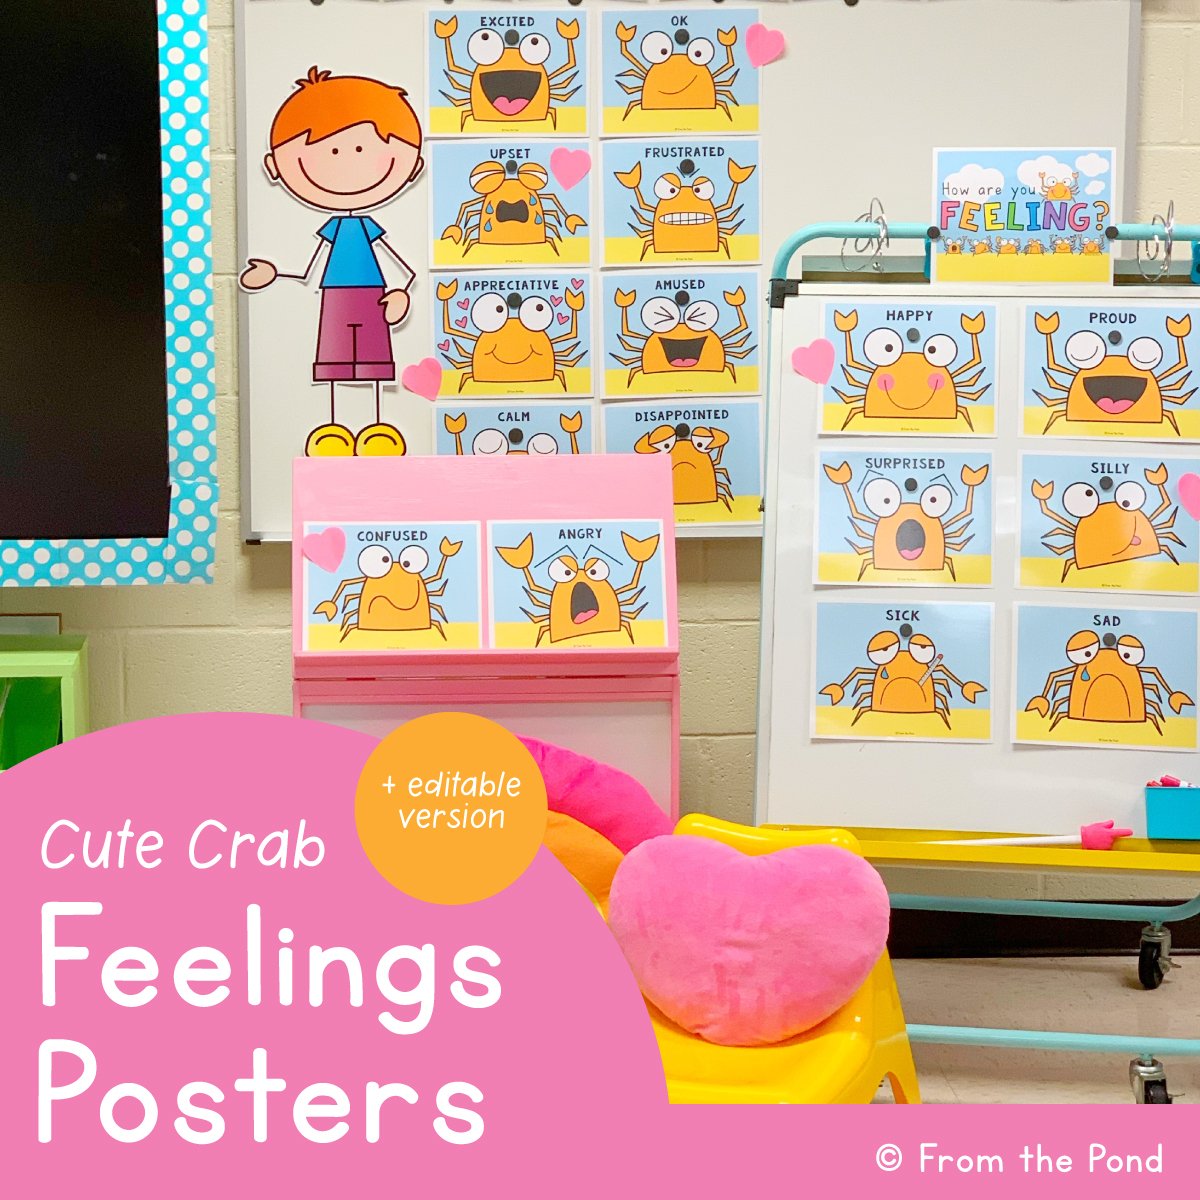 Feeling Posters